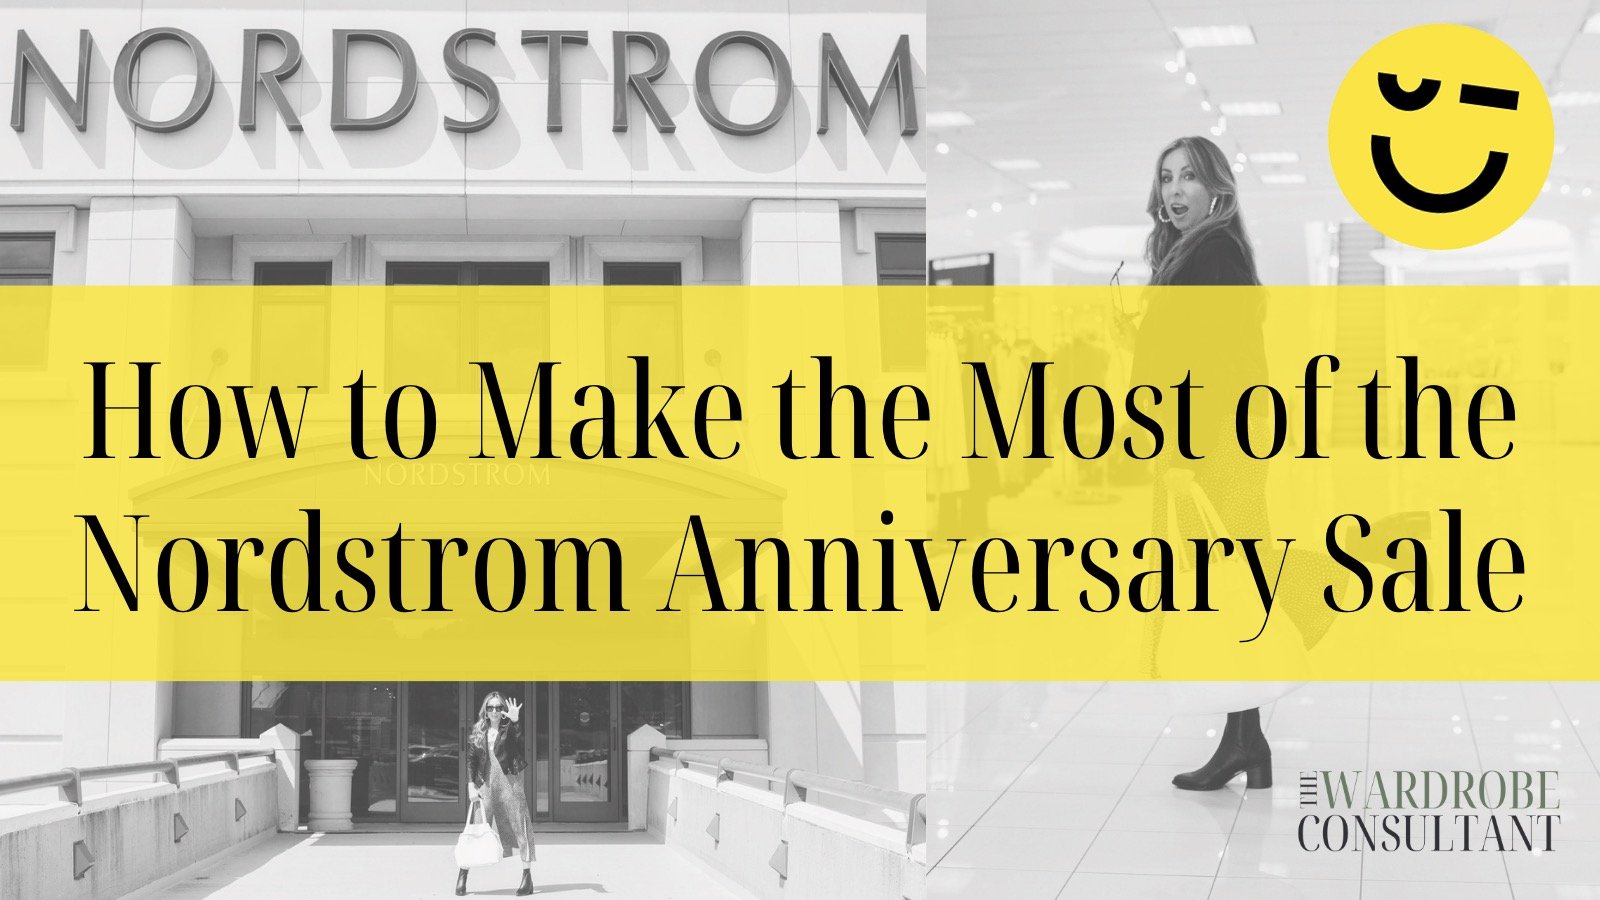 My In-Stock Nordstrom Anniversary Sale Picks For Public Access